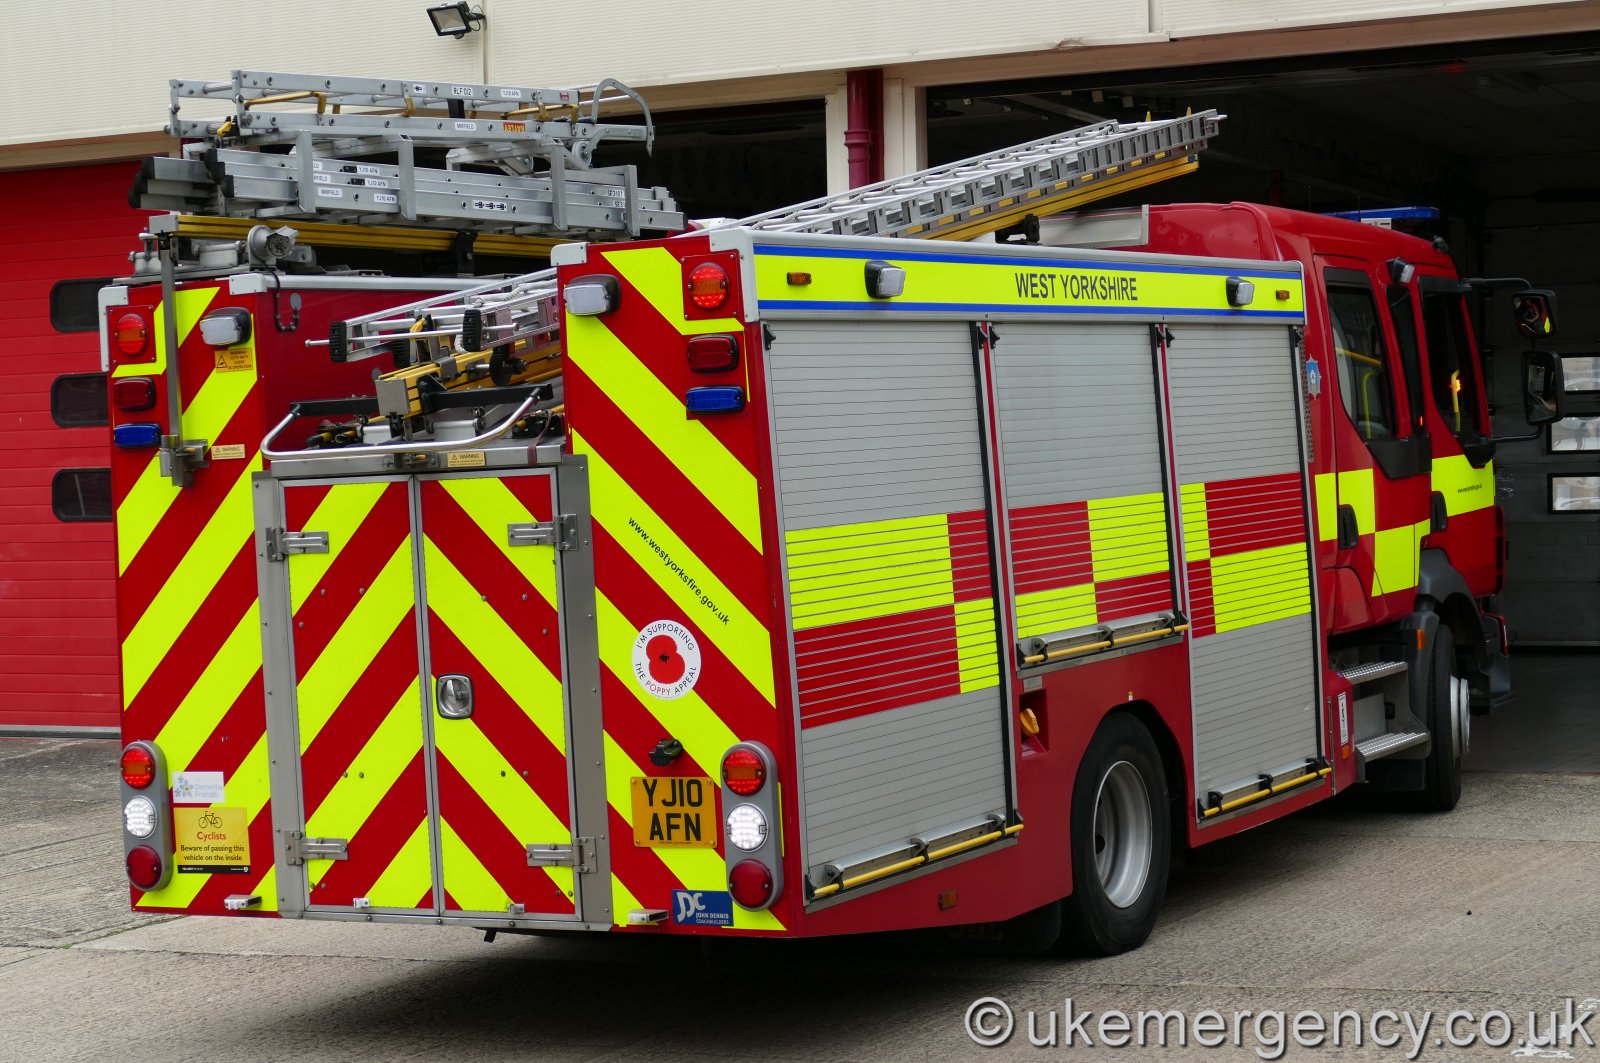 YJ10 AFN West Yorkshire Fire and Rescue Service Volvo / JDC | UK ...